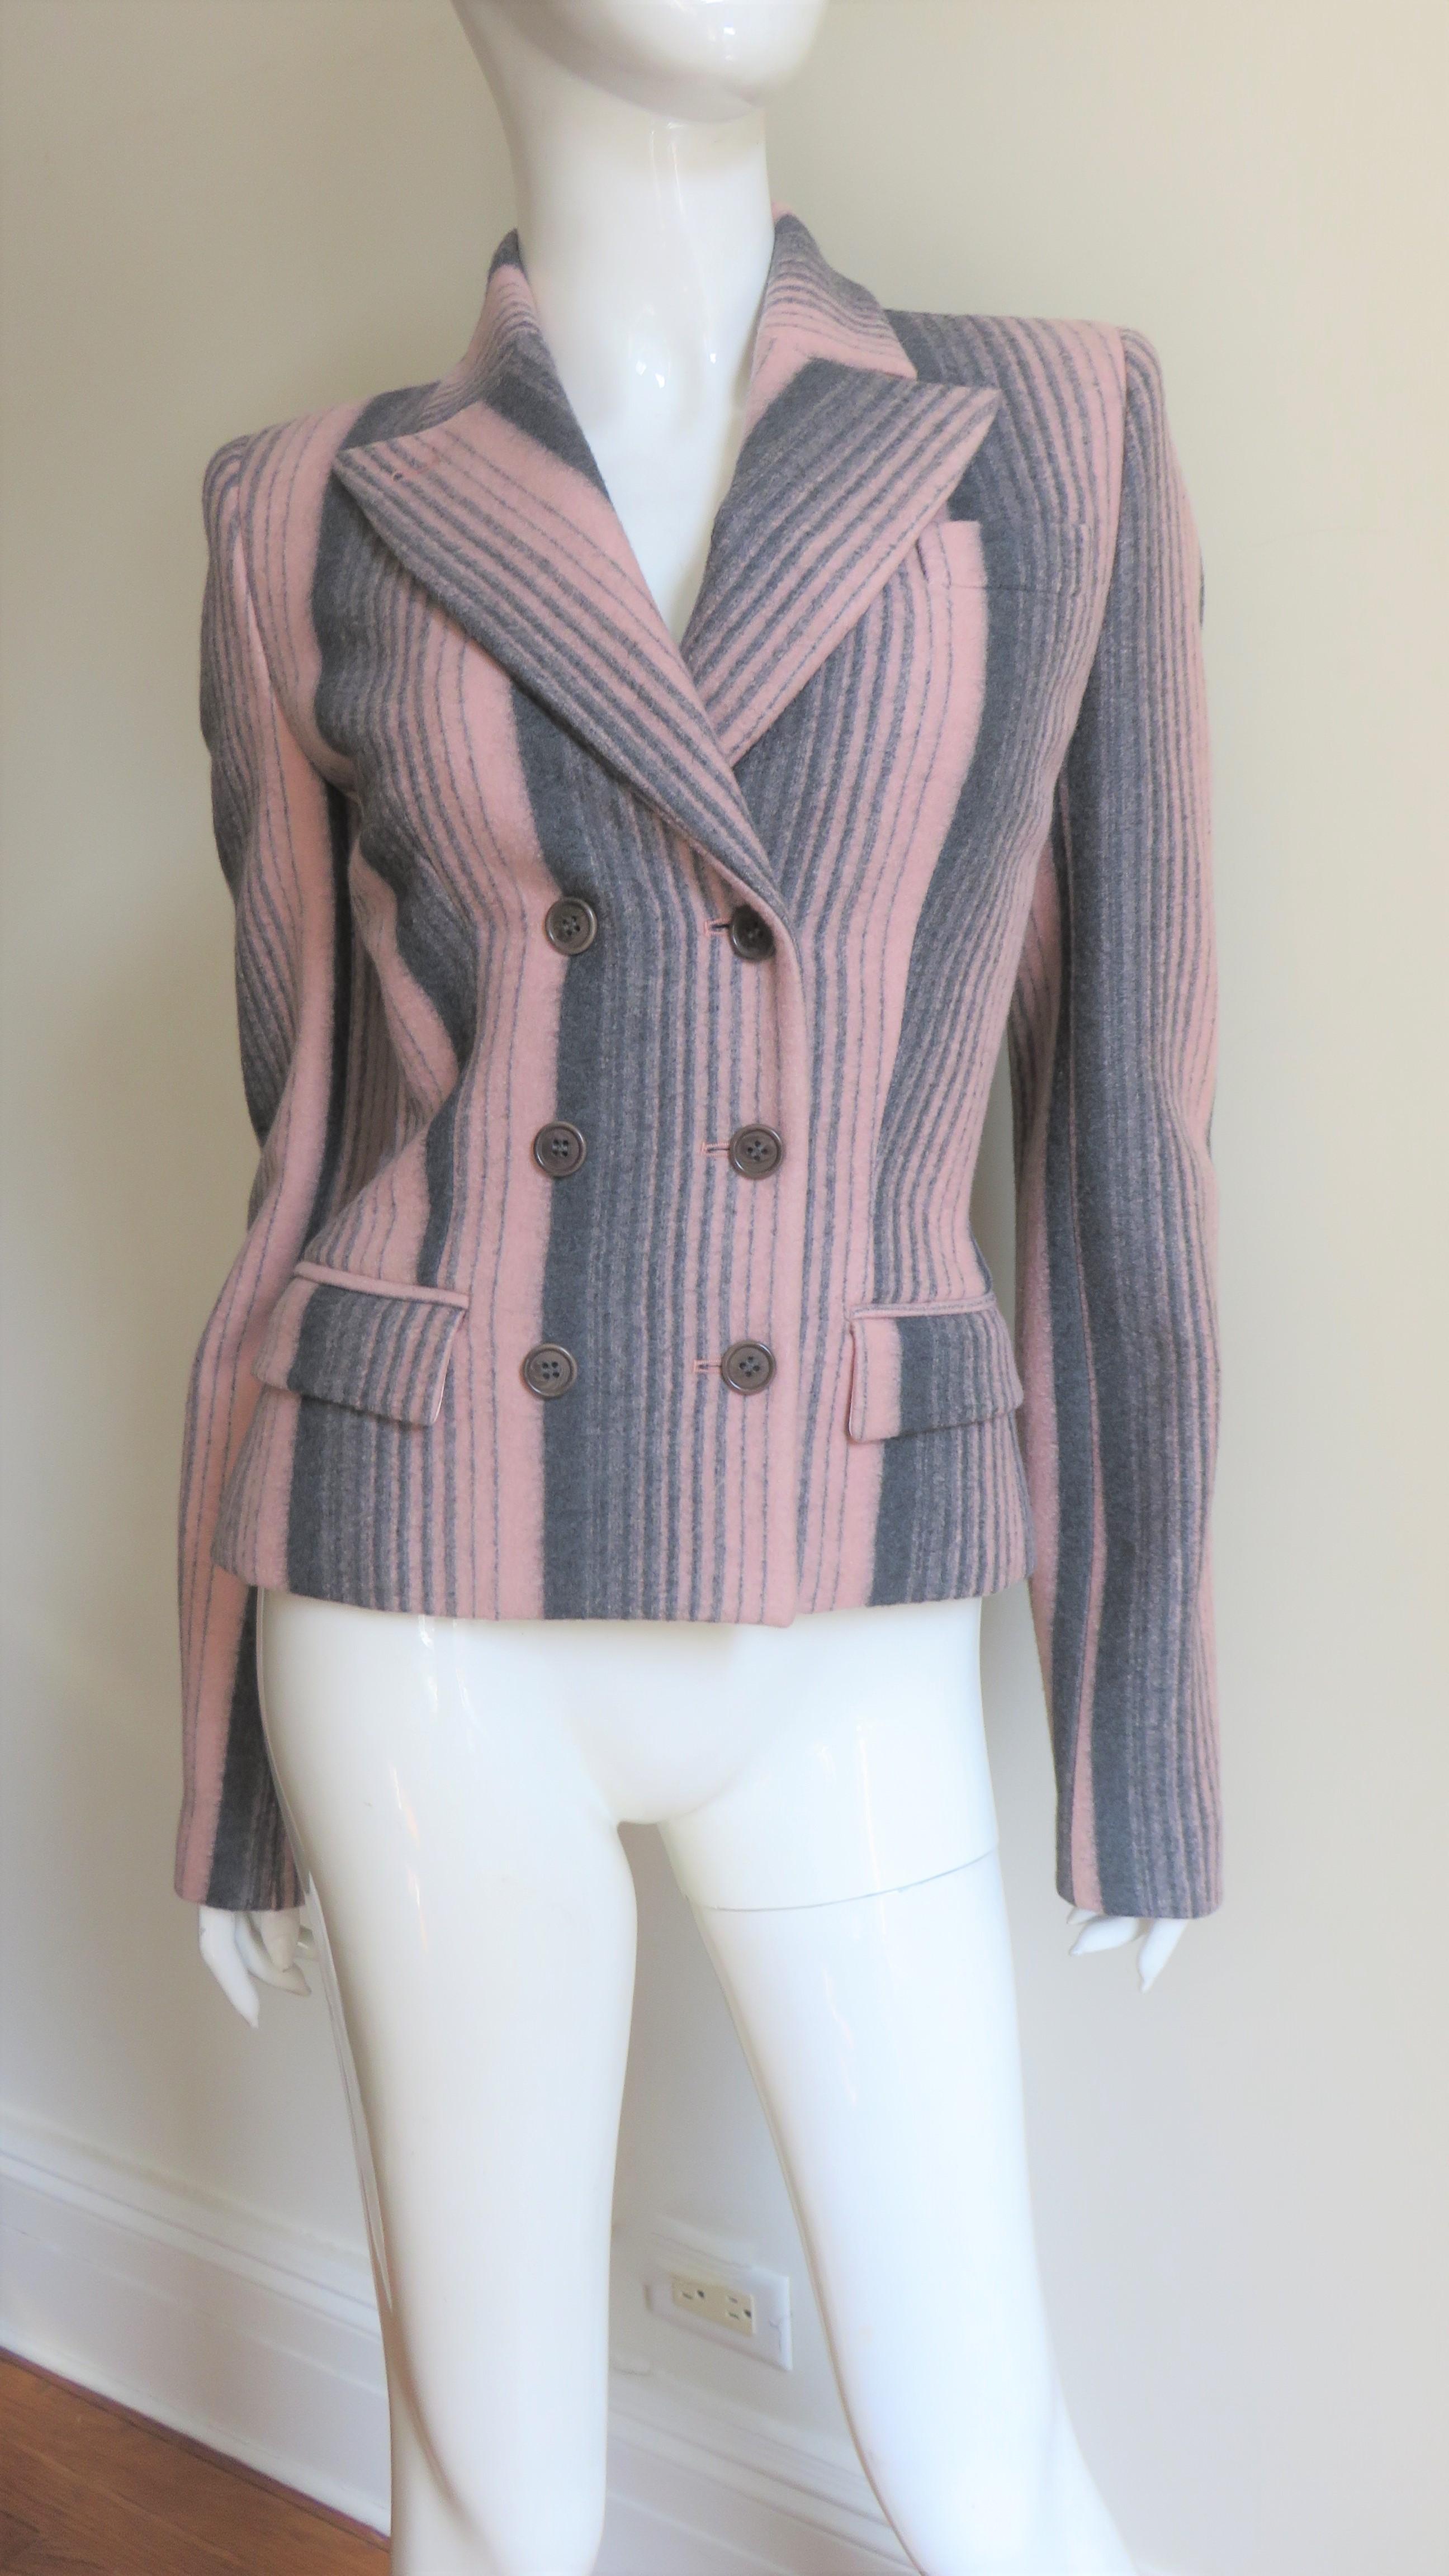 Alexander McQueen New Grey and Pink Striped Jacket F/W 1999 In New Condition For Sale In Water Mill, NY